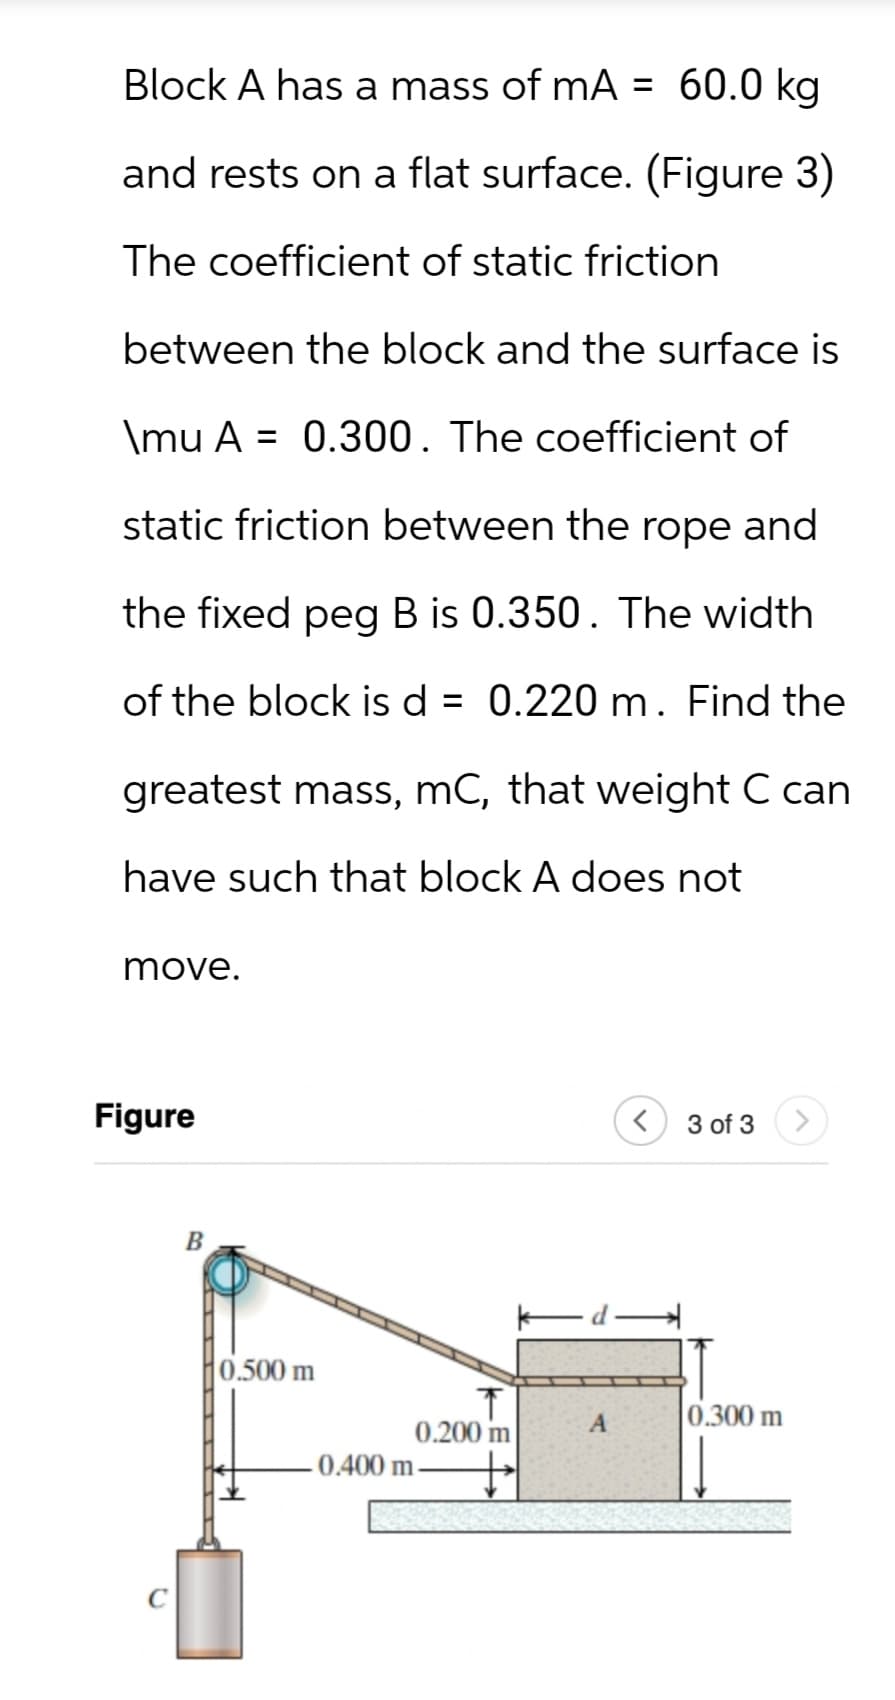 Block A has a mass of mA = 60.0 kg
and rests on a flat surface. (Figure 3)
The coefficient of static friction
between the block and the surface is
\mu A 0.300. The coefficient of
=
static friction between the rope and
the fixed peg B is 0.350. The width
of the block is d = 0.220 m. Find the
greatest mass, mC, that weight C can
have such that block A does not
move.
Figure
B
0.500 m
3 of 3
A
0.300 m
0.200 m
0.400 m-